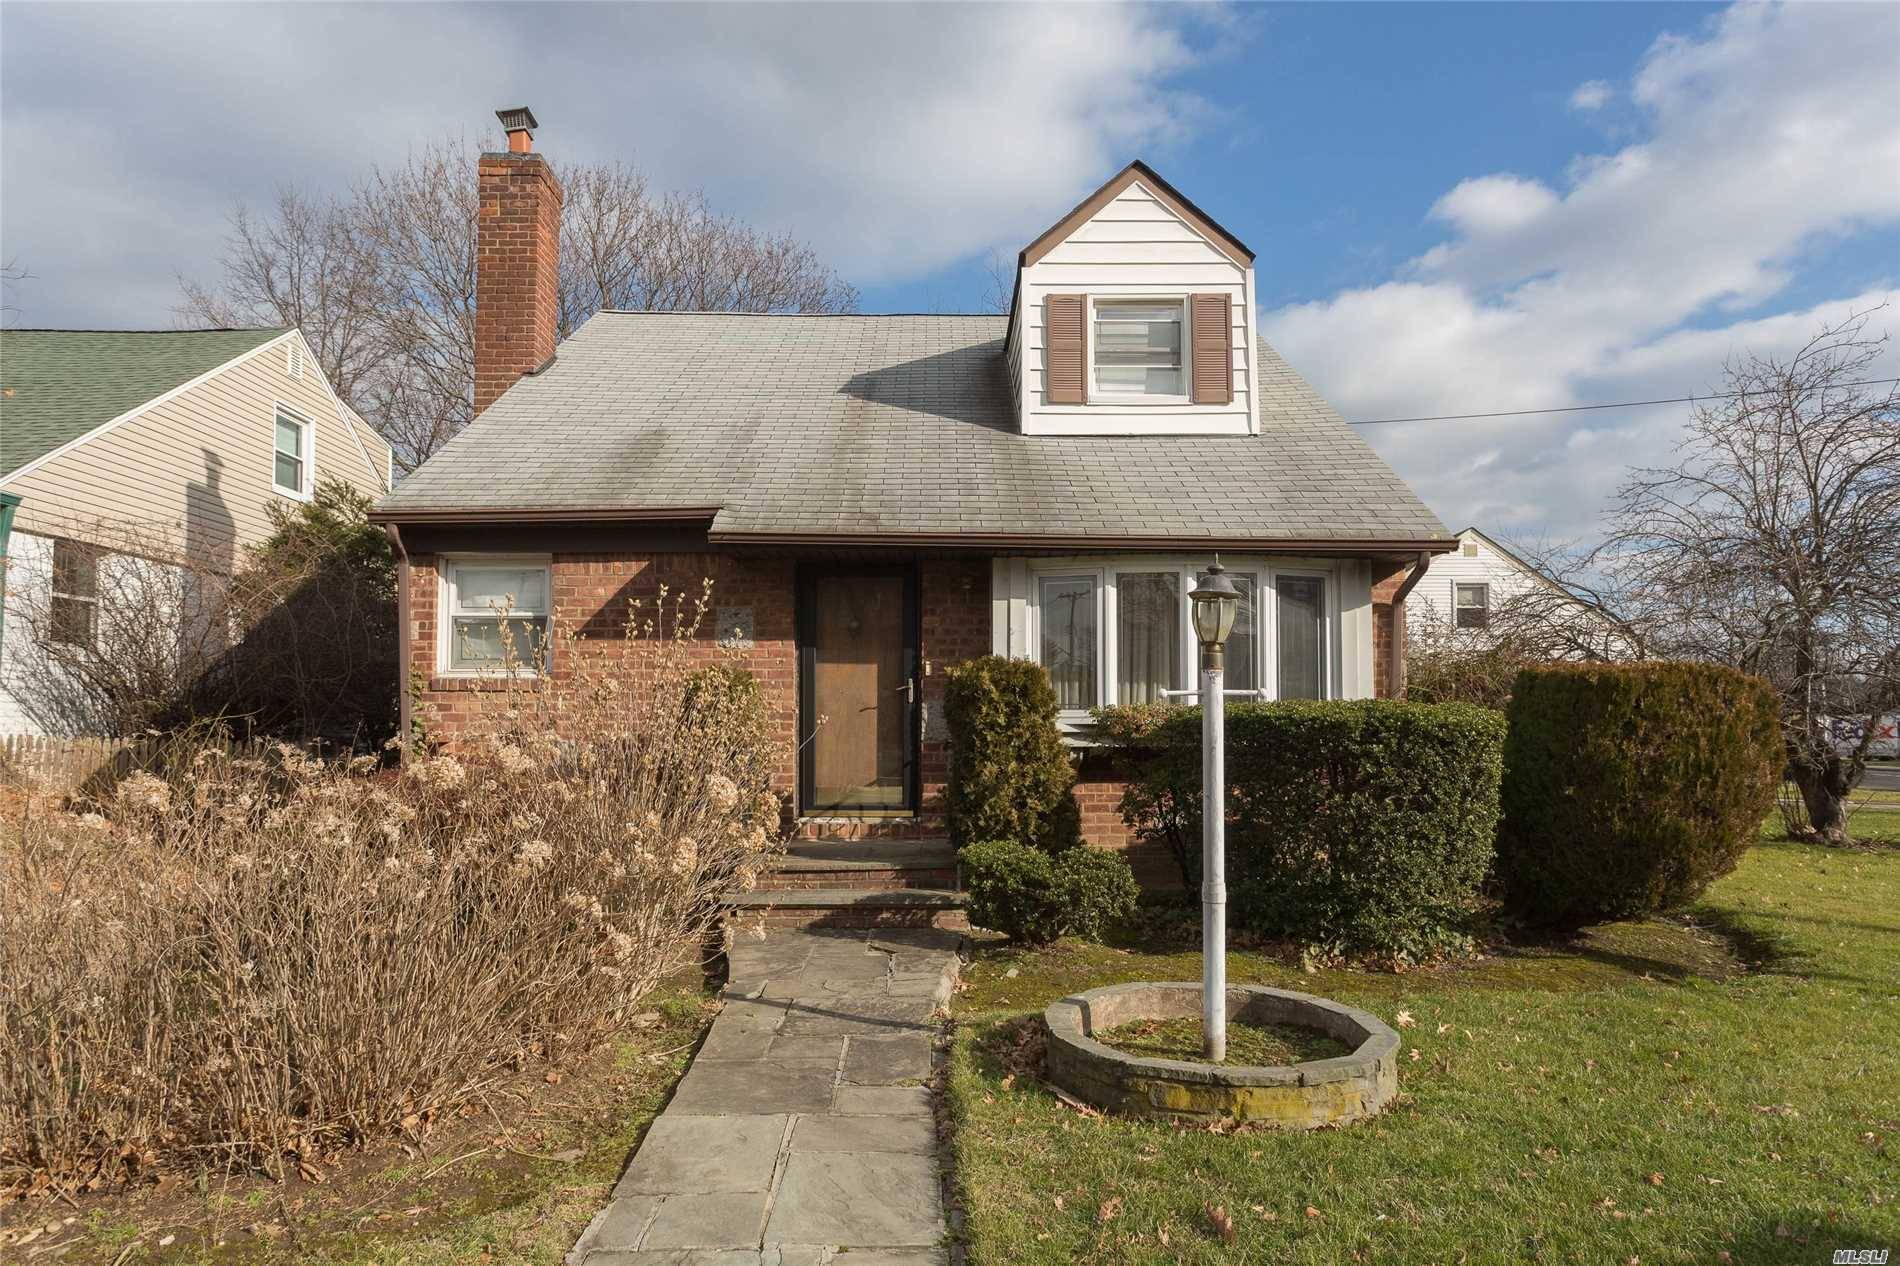 Sunny And Fully Detached, This 3 Bedroom, 3 Bath, 1 Family Feats A Detached Brick Garage And A Covered Patio In The Rear.